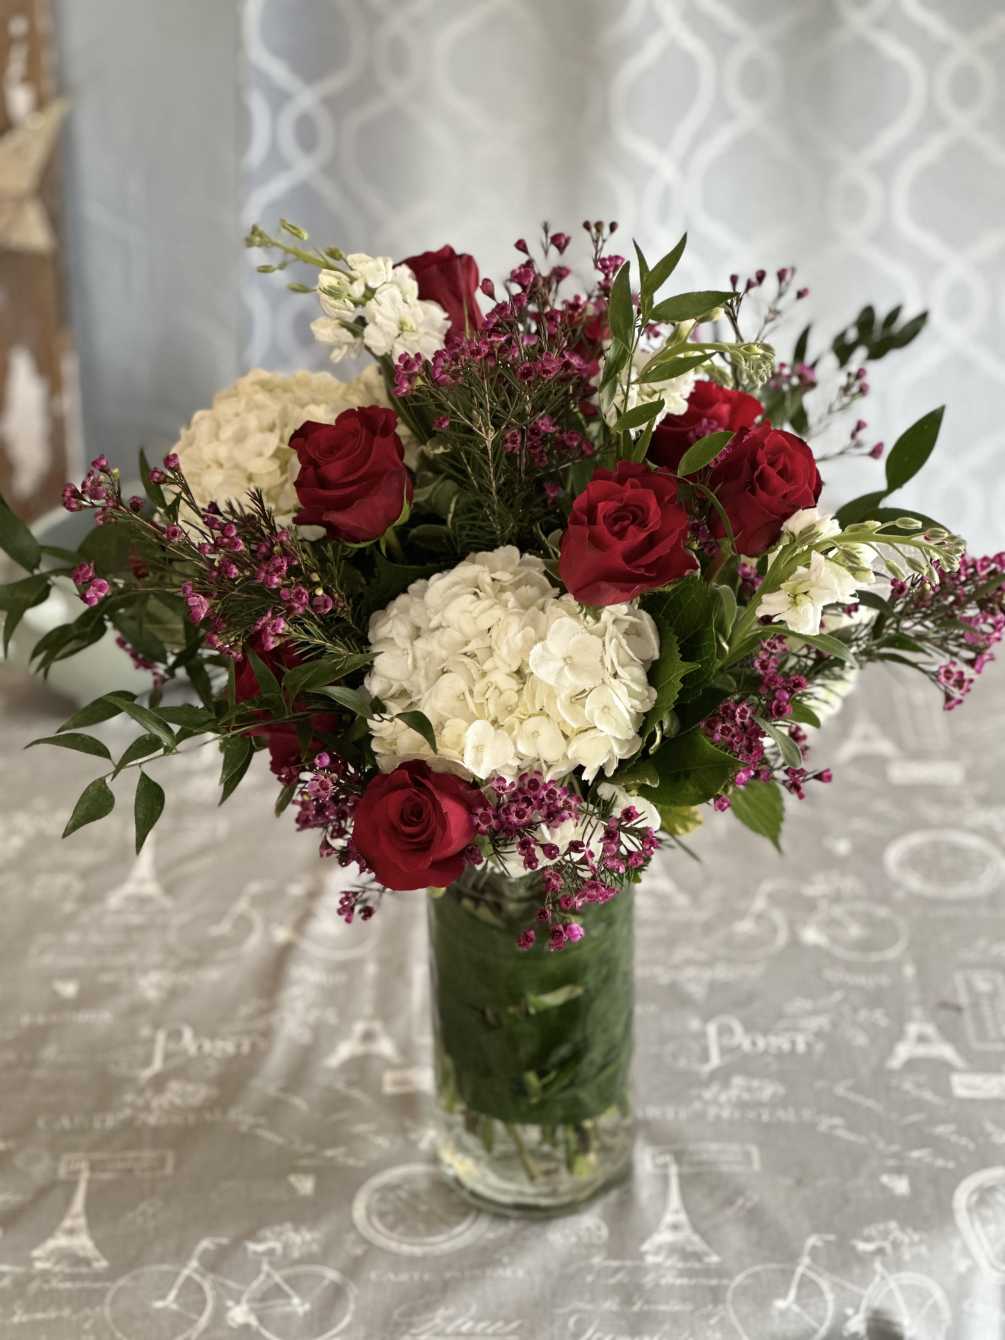 1 dozen roses arranged in a vase with fillers and white hydrangea